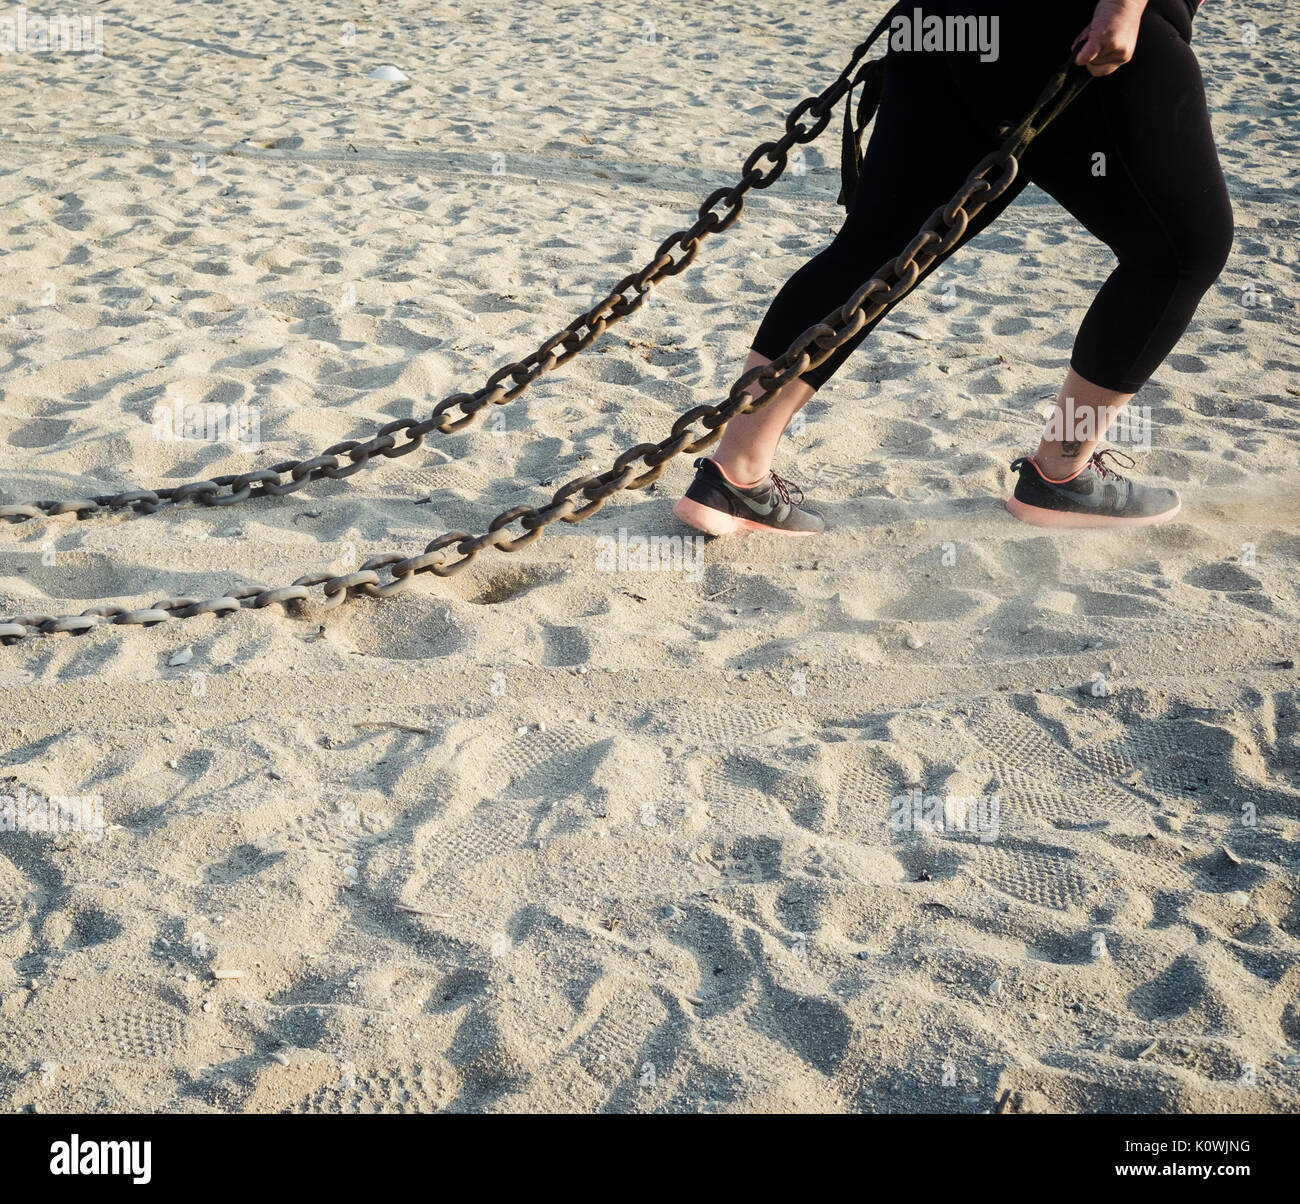 A woman drags a metal chain as part of a bootcamp fitness session on Falmouth's Gyllyngvase Beach. Stock Photo